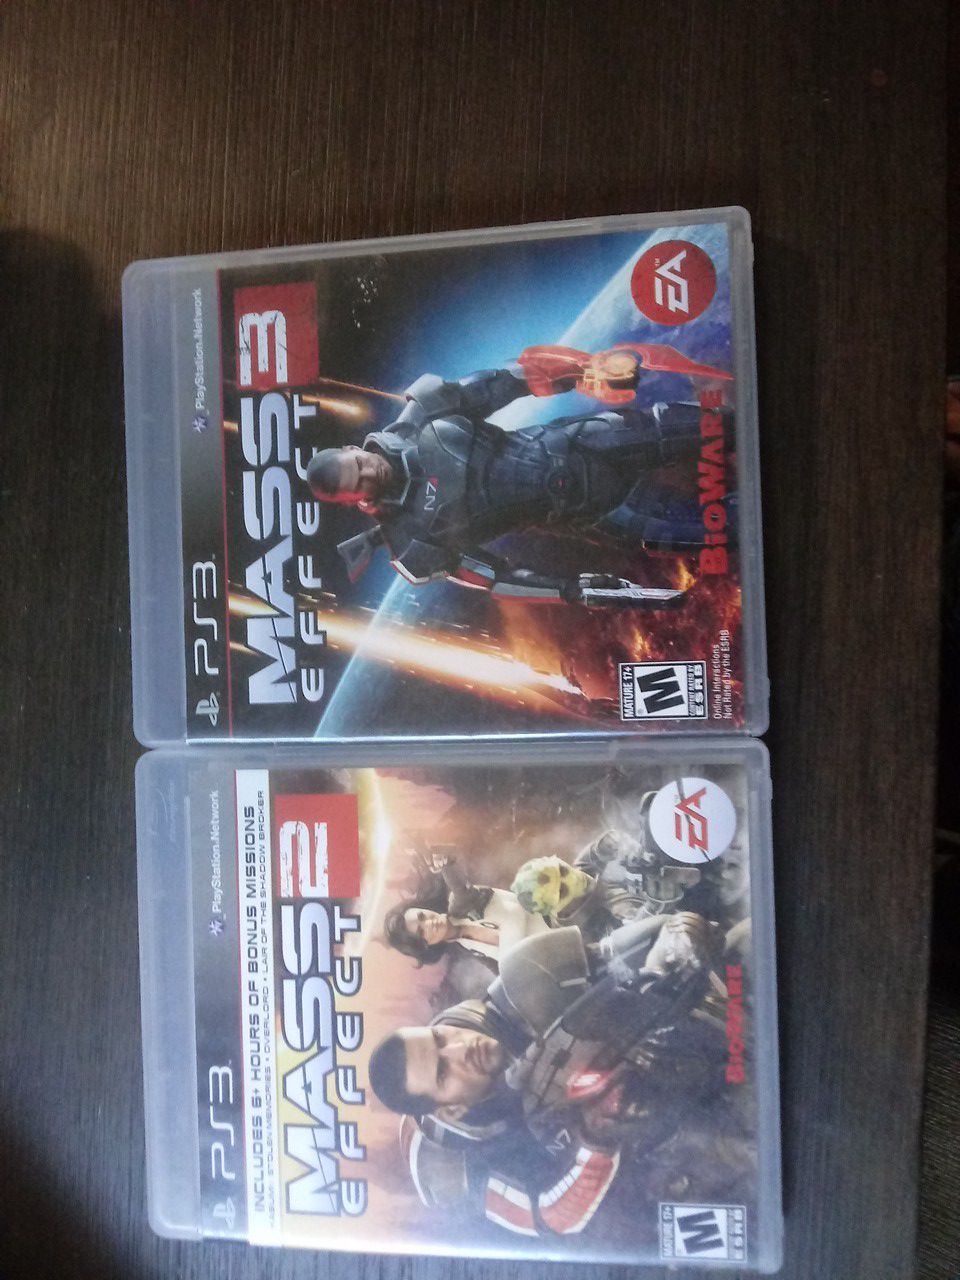 Mass effect 2 and 3 games for ps3